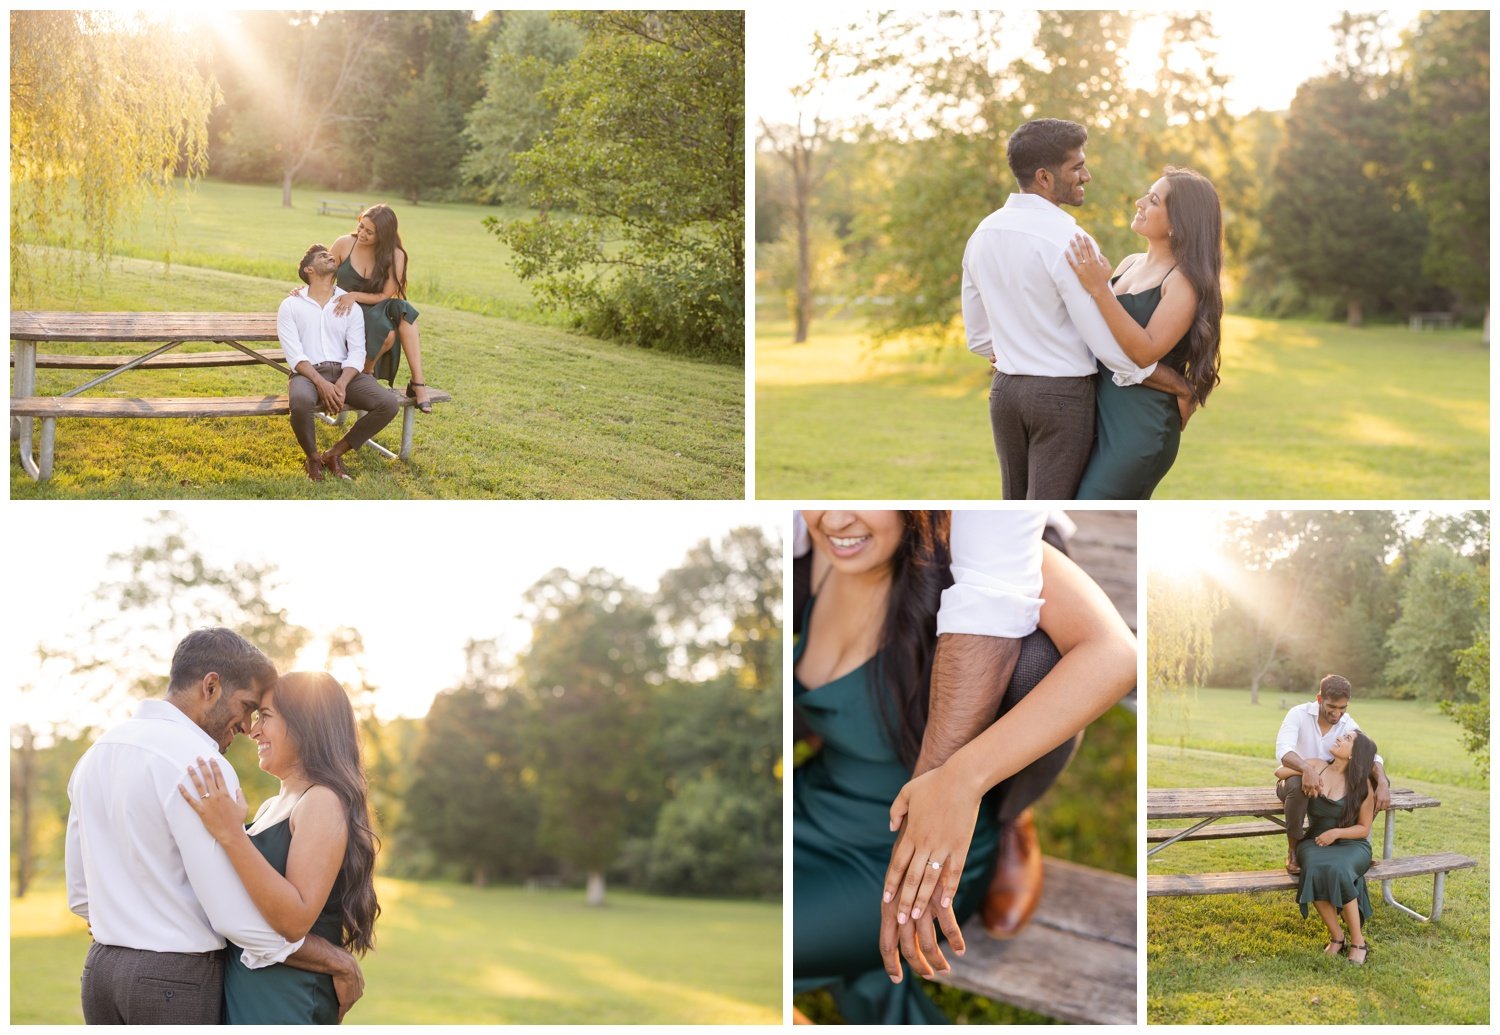 French-Creek-Park-PA-Summer-Lakeside-Engagement-Session-18.jpg